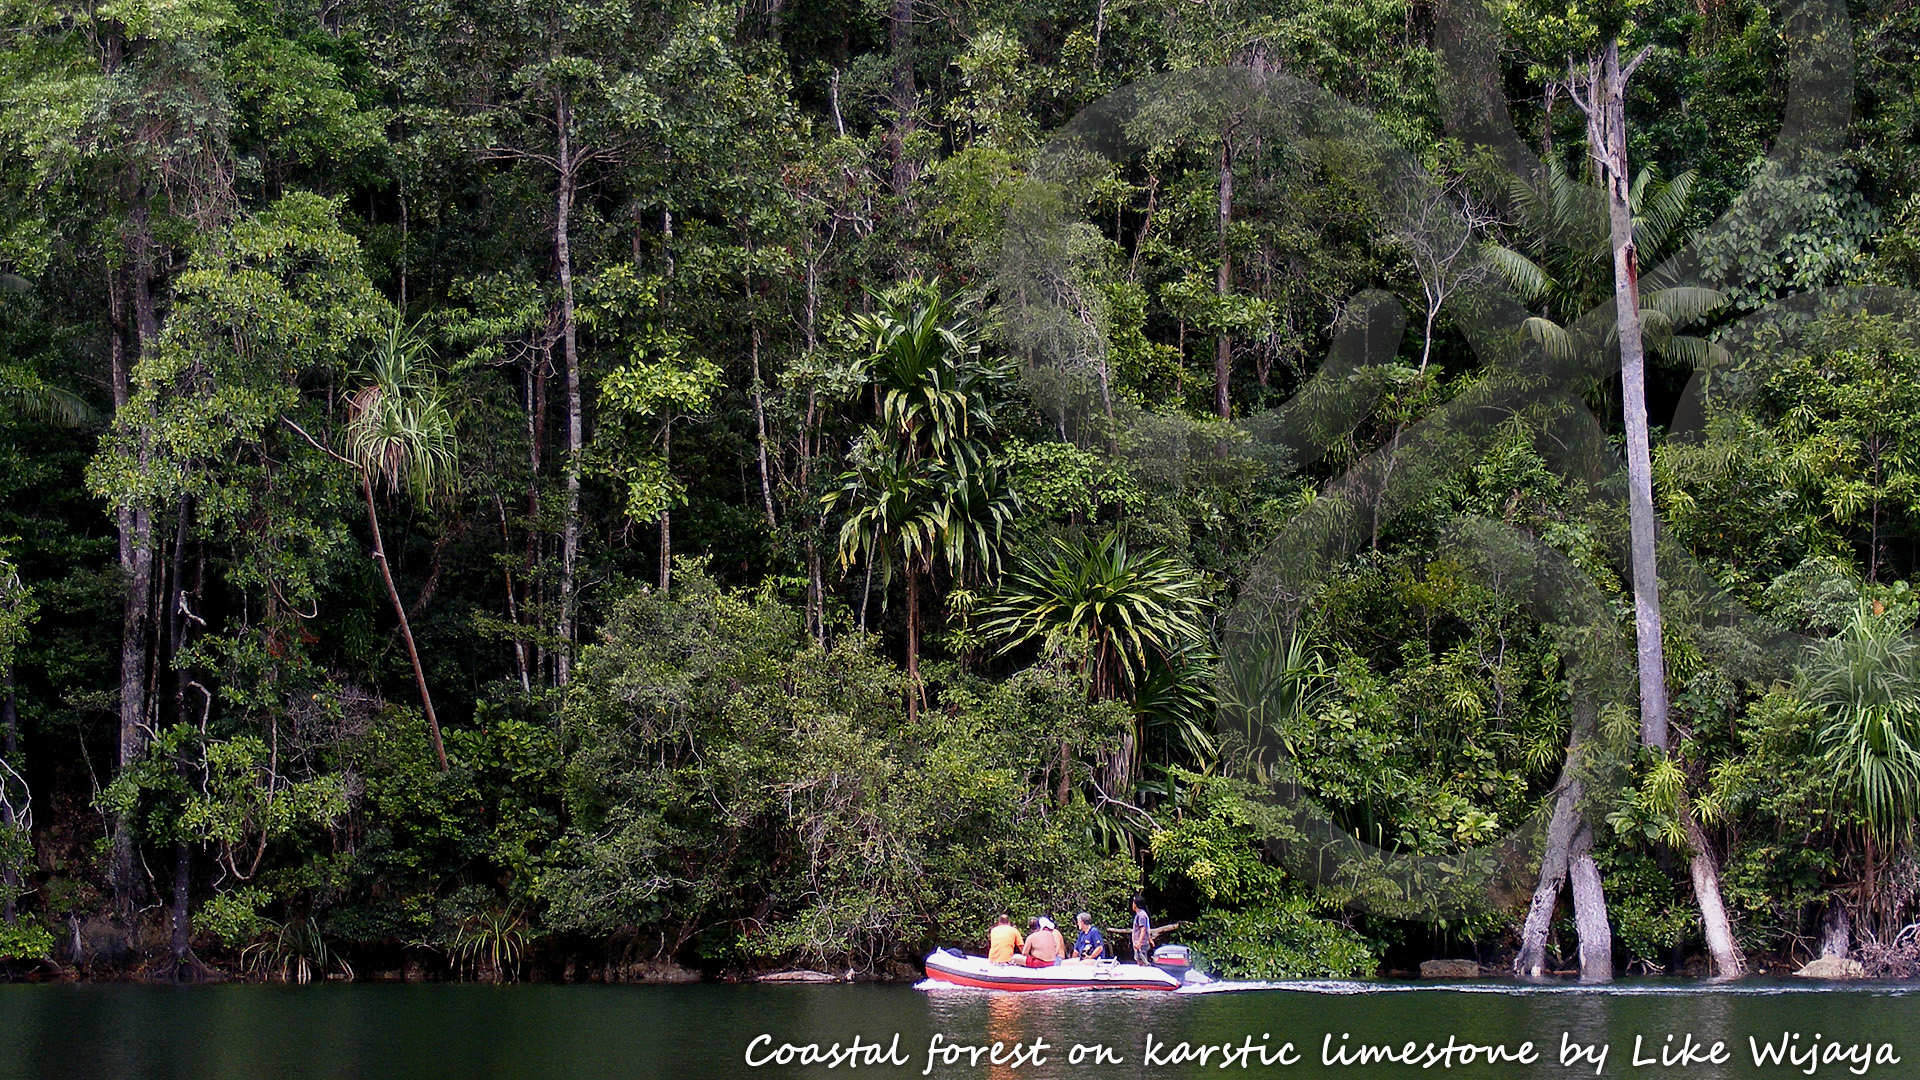 Cruising the Raja Ampat islands of Waigeo and Misool provides an interesting window of observation into otherwise impenetrable lowland forests on karstic limestone. Copyright © Like Wijaya